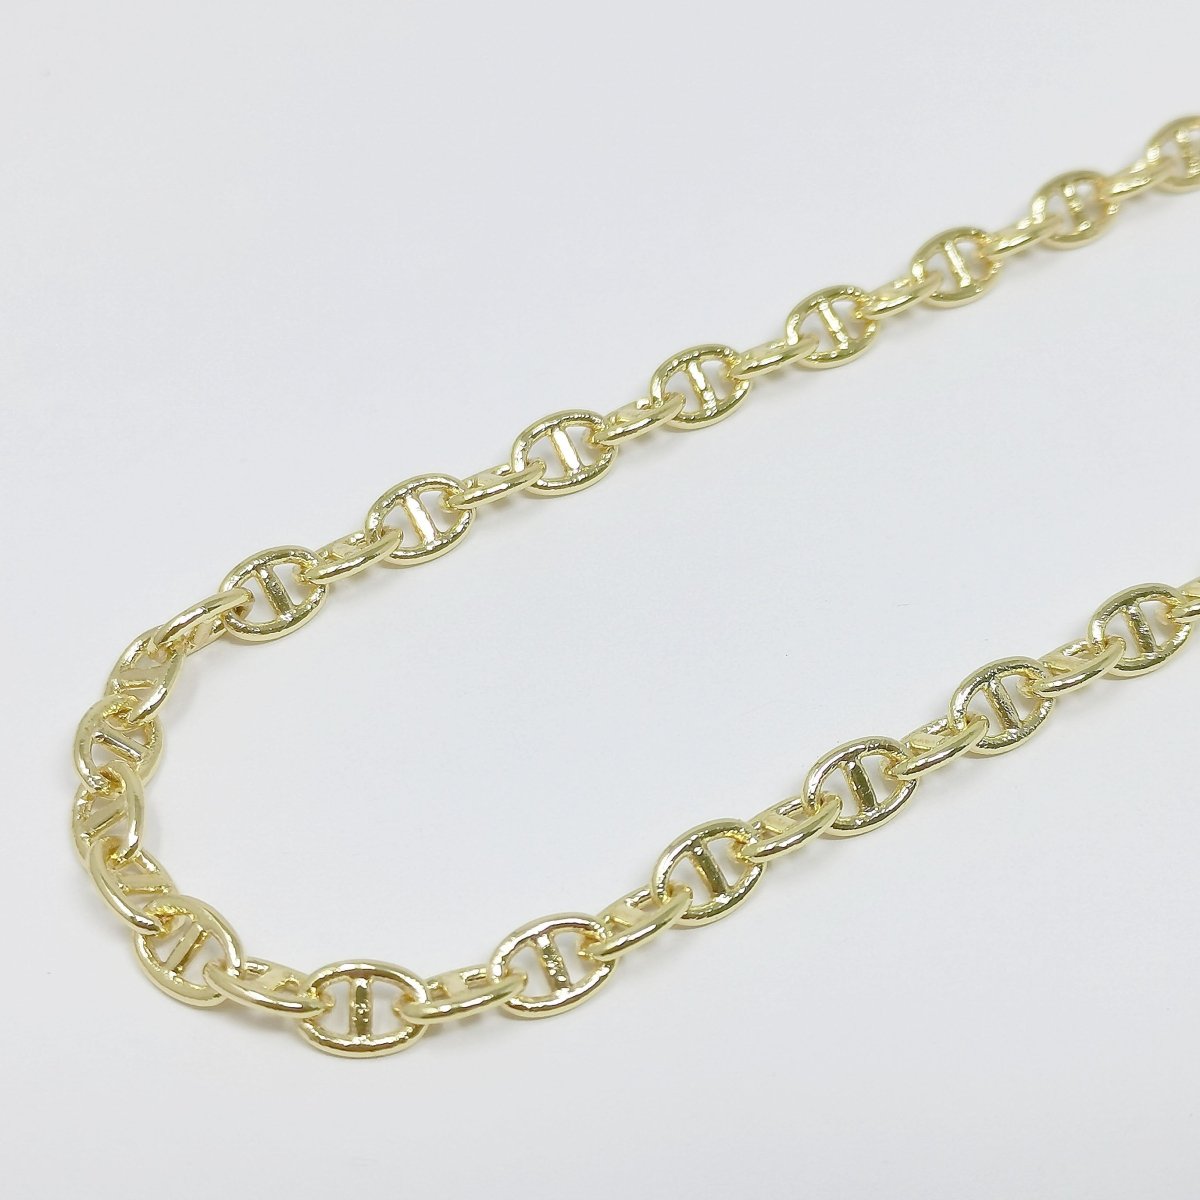 24K Gold Filled Anchor Chain by Yard, Gold Filled Mariner Chain by Yard, Wholesale bulk Roll Chain for Jewelry Making 5x9mm | ROLL-355 Clearance Pricing - DLUXCA